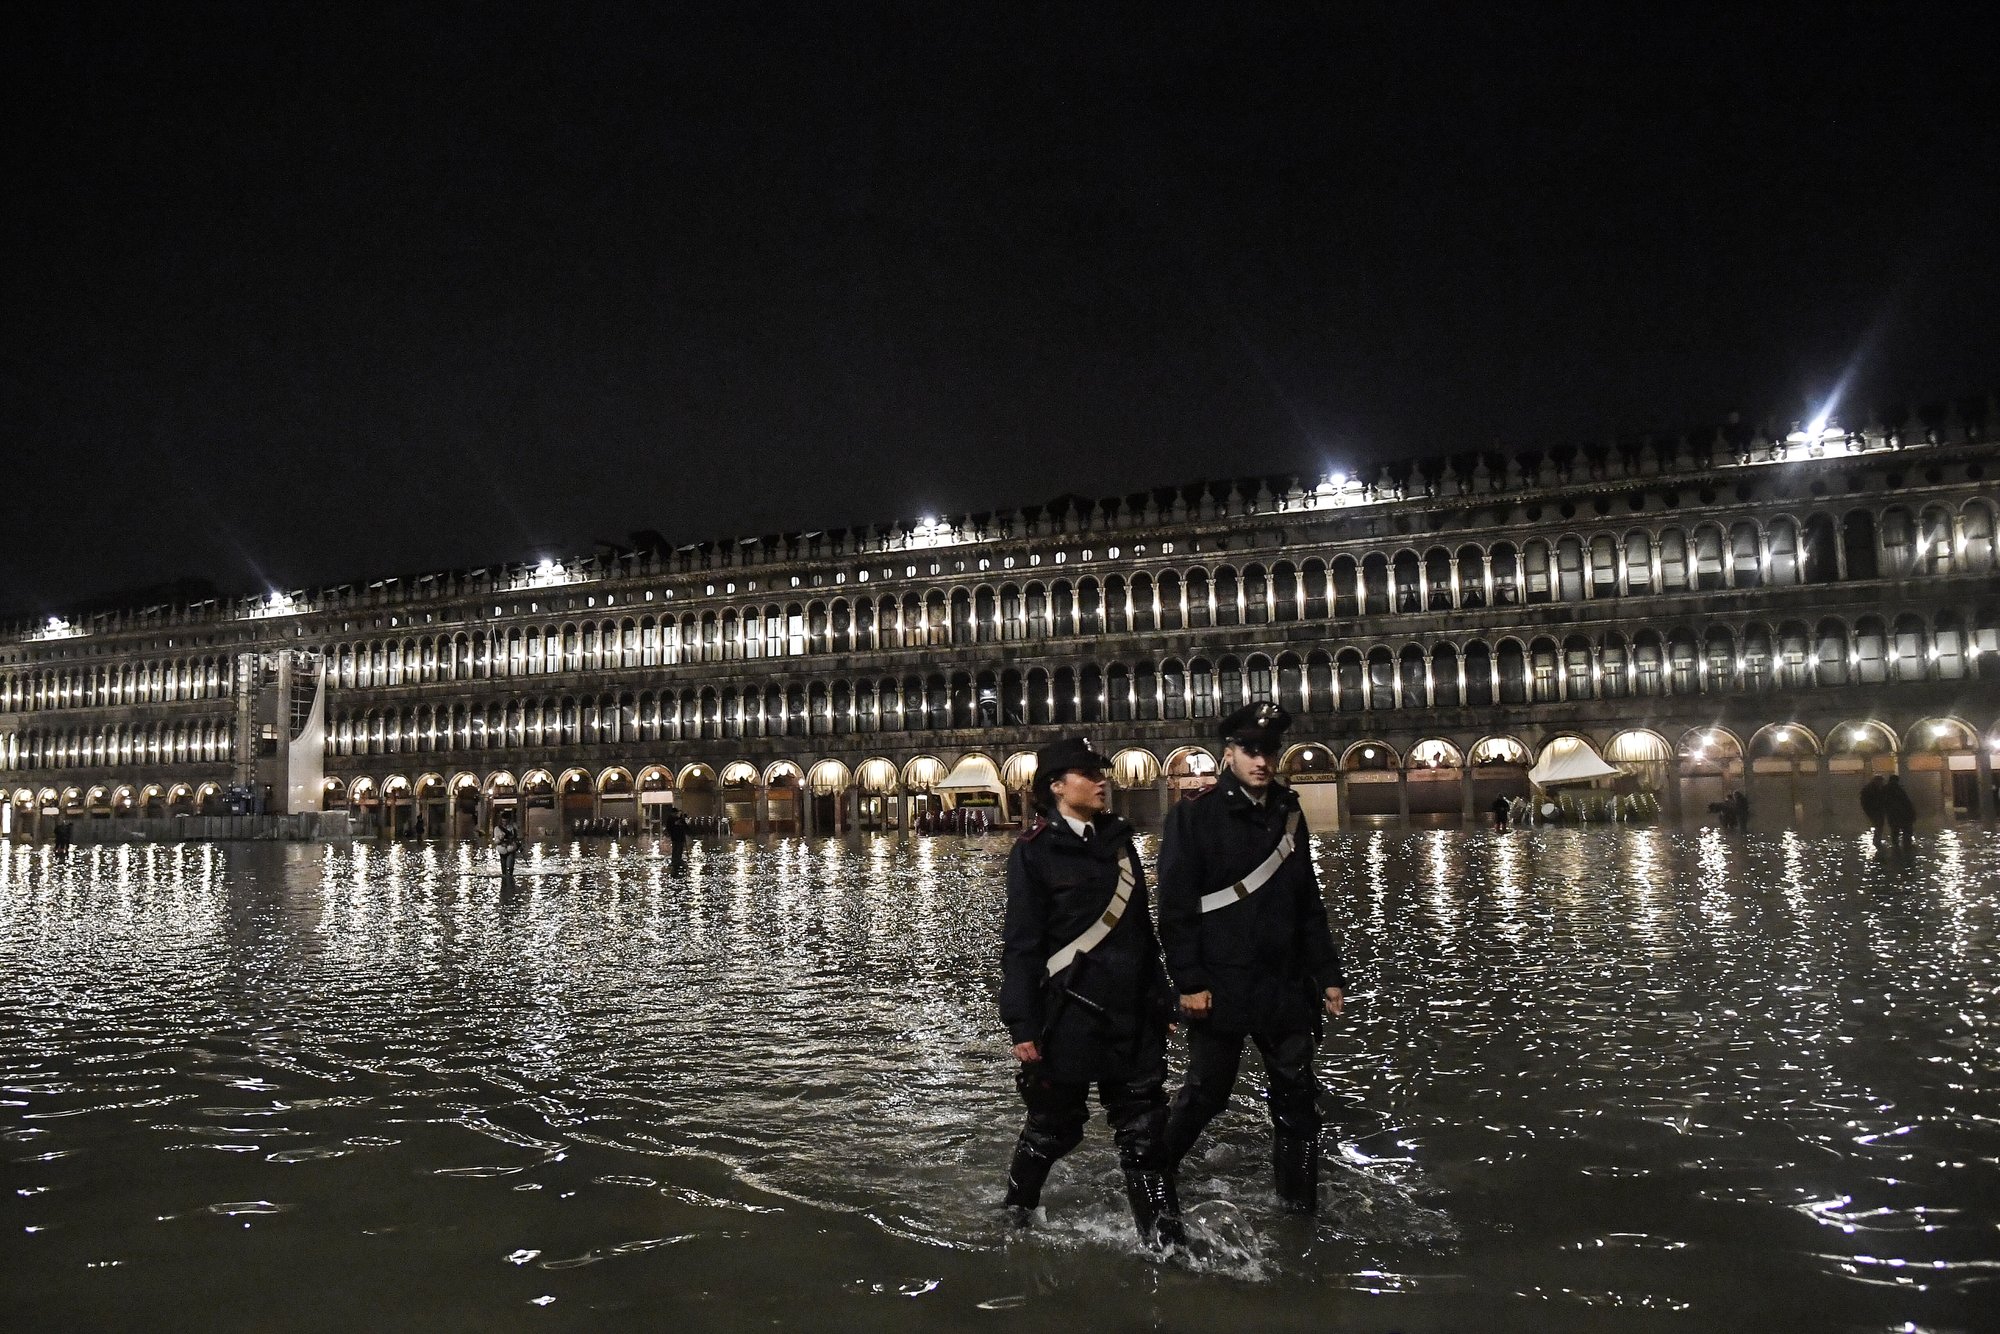 The water level in Venice may rise by more than a meter in the coming decades